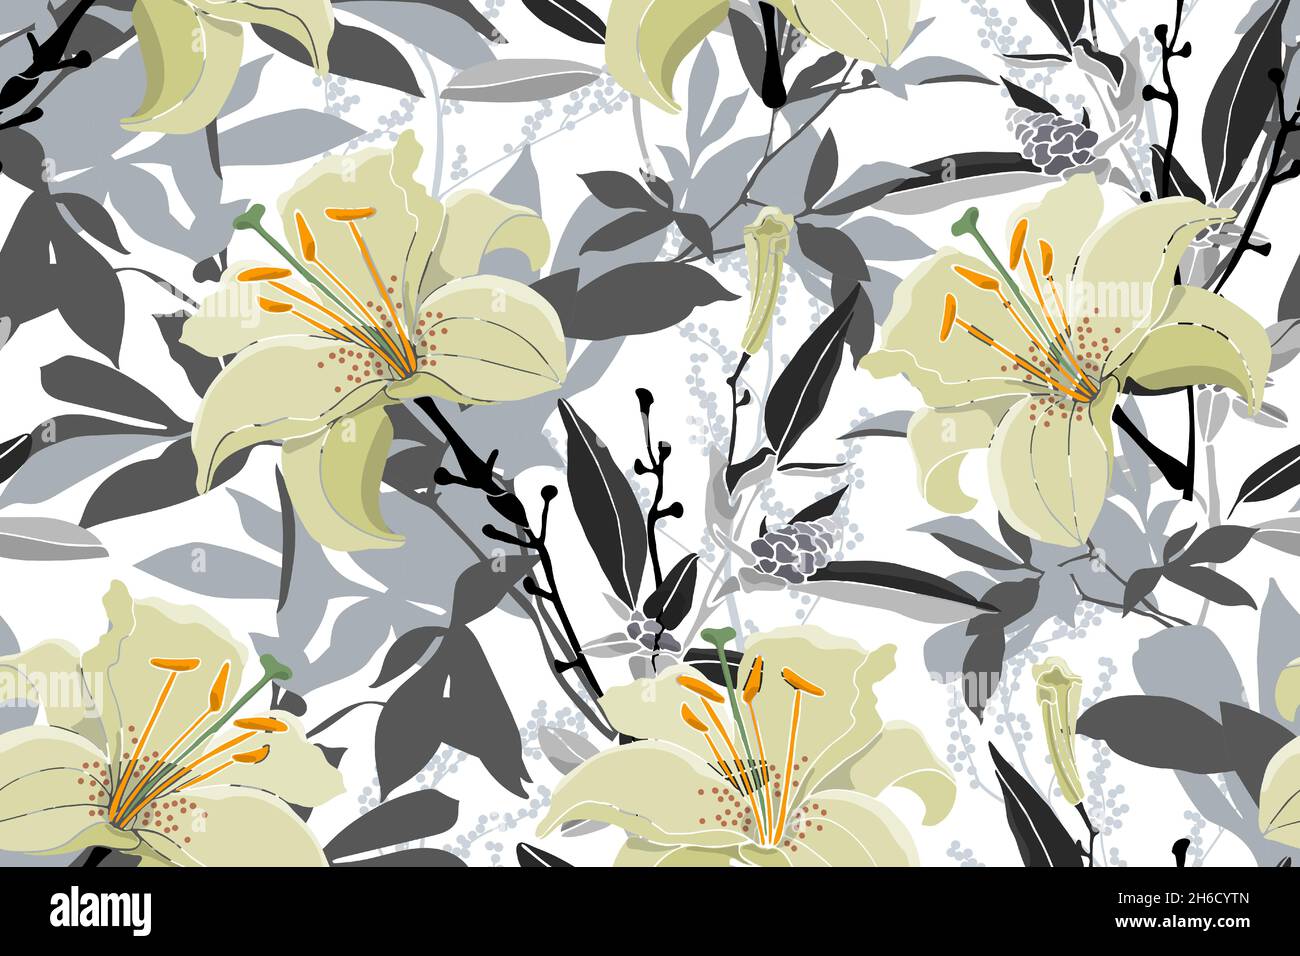 Vector floral seamless pattern. Lilies, quinoa and wormwood, gray leaves. Stock Vector